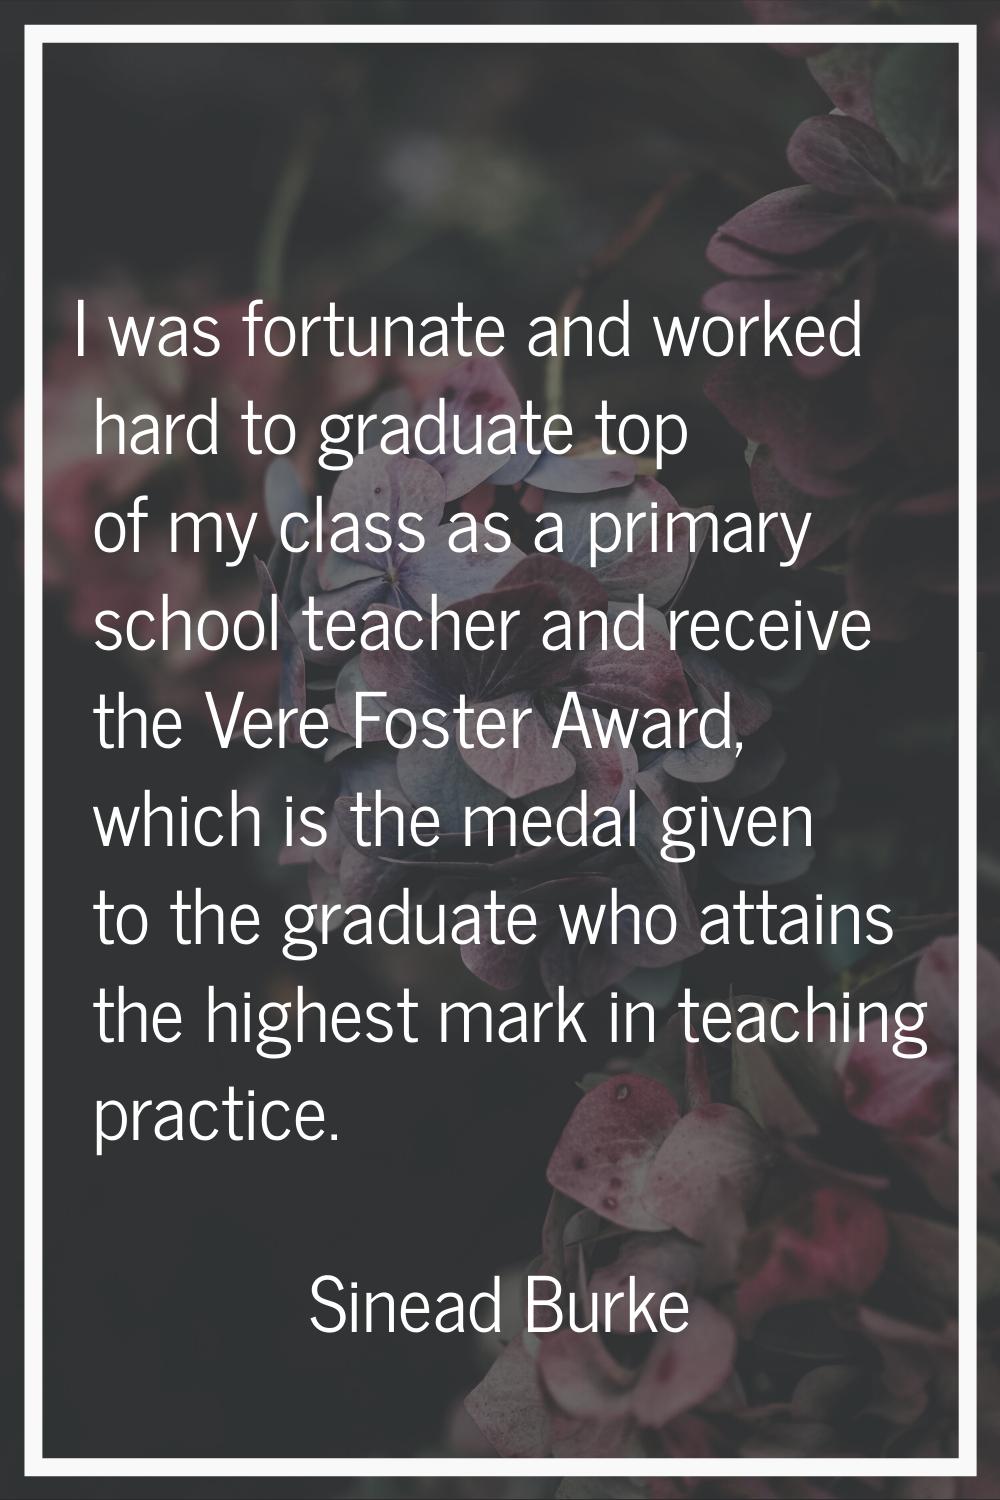 I was fortunate and worked hard to graduate top of my class as a primary school teacher and receive